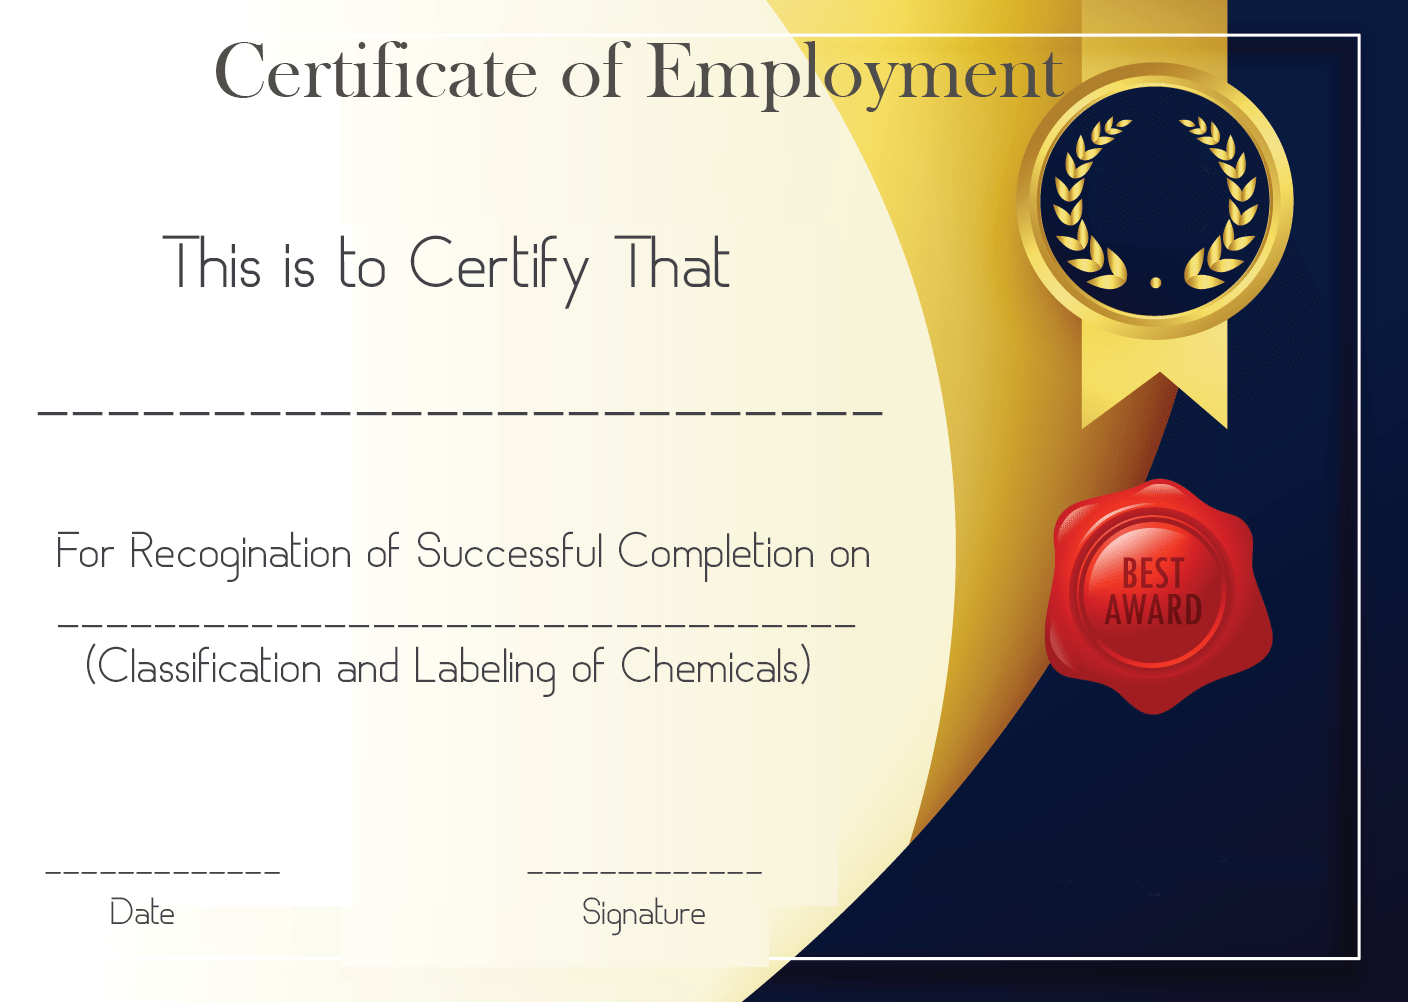 Free Sample Certificate Of Employment Template | Certificate Inside Best Performance Certificate Template